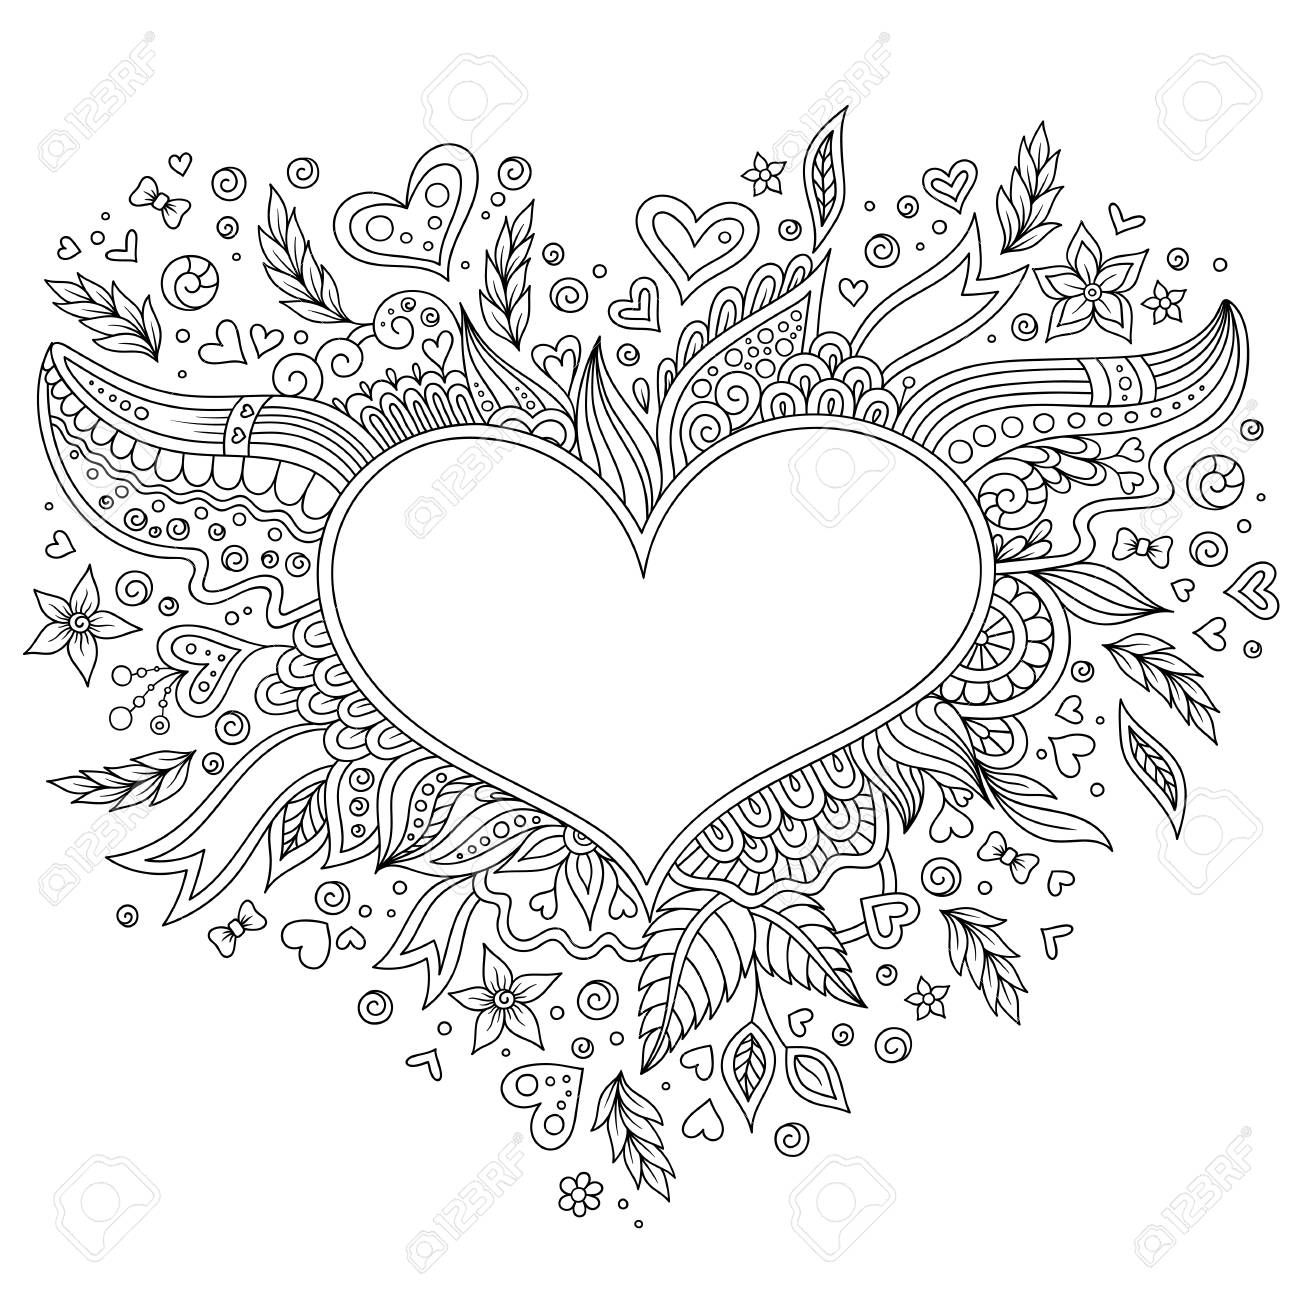 Coloring page flower heart st valentines day coloring page with details isolated on white background royalty free svg cliparts vectors and stock illustration image